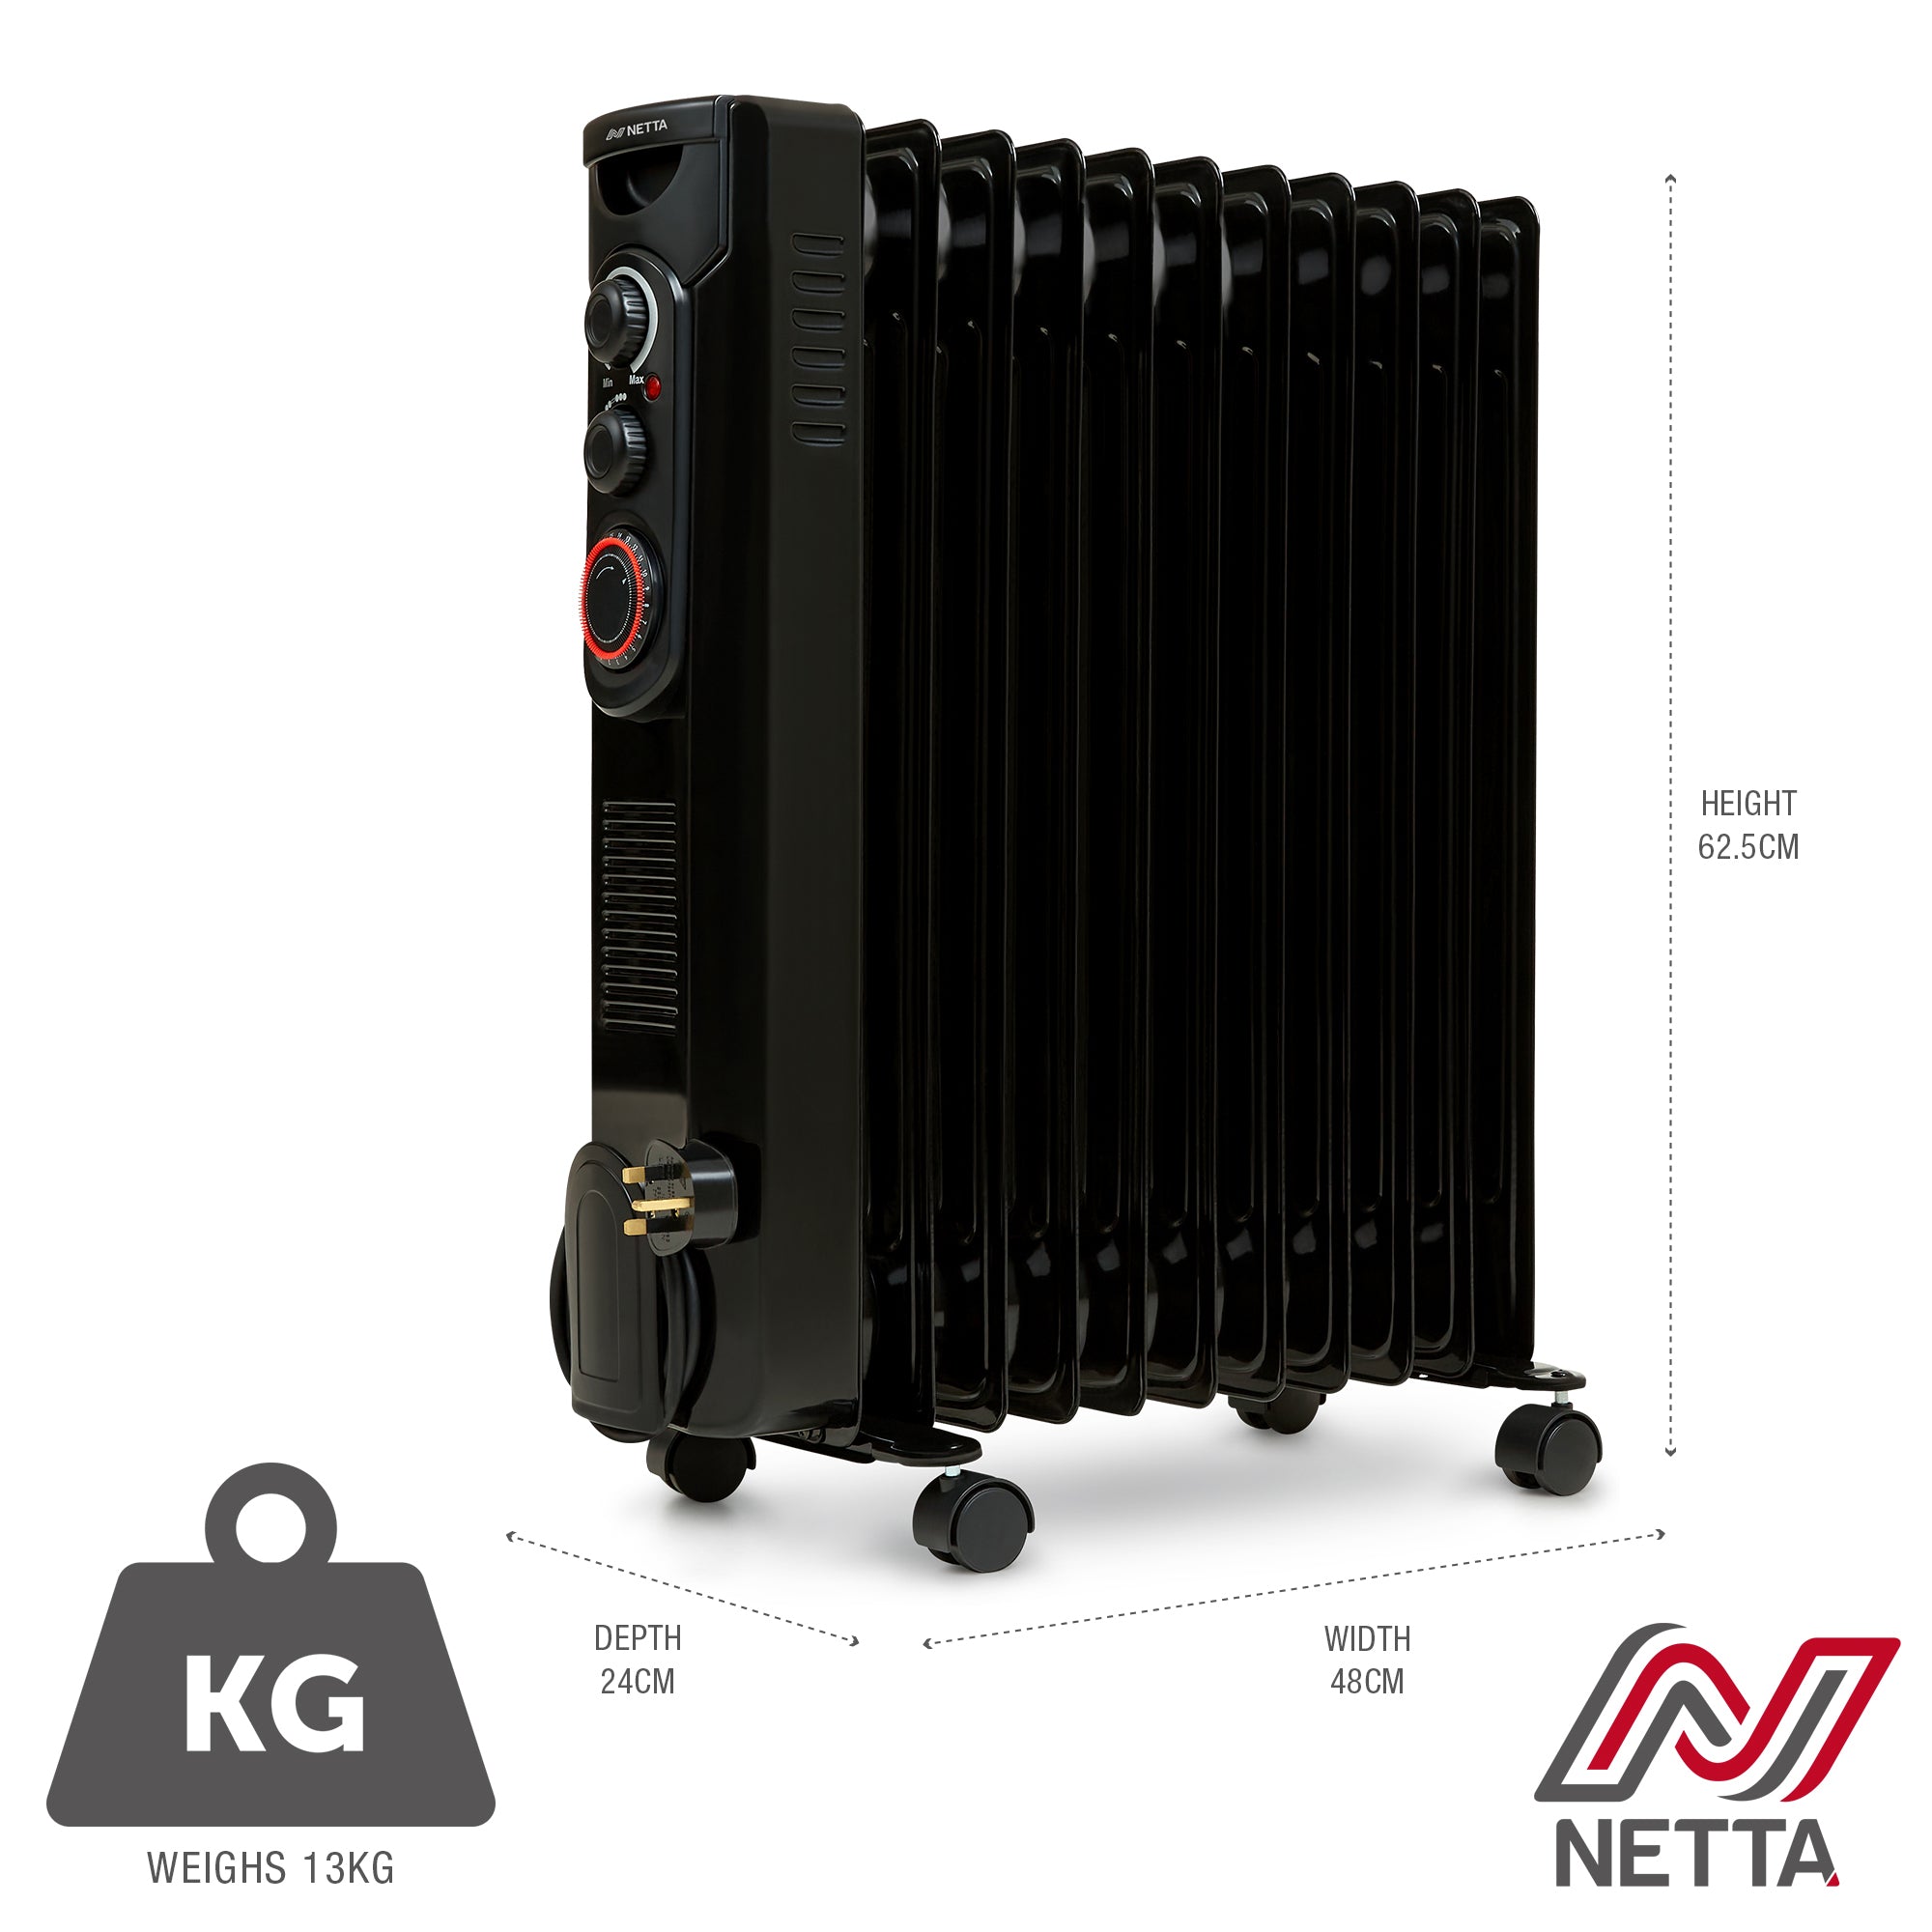 NETTA Oil Filled Radiator 2500W Portable Electric Heater with Thermostat & 24 Hour Timer – 11 Fin, Black